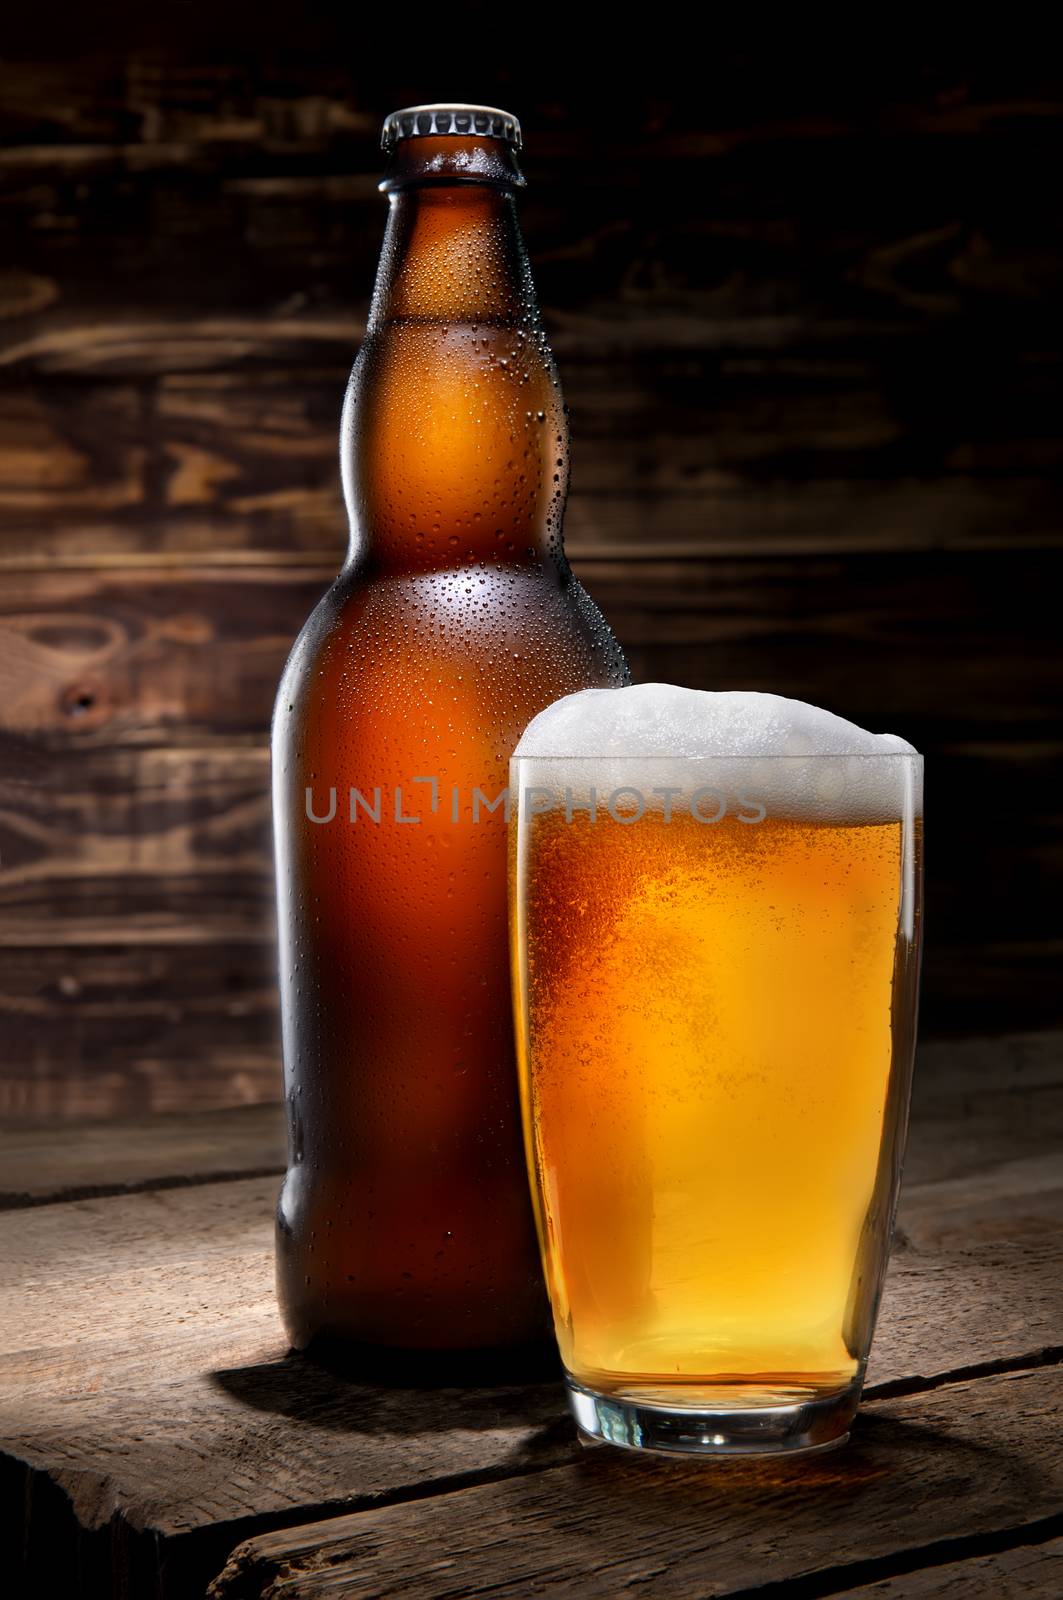 Beer in glass and bottle on wooden background